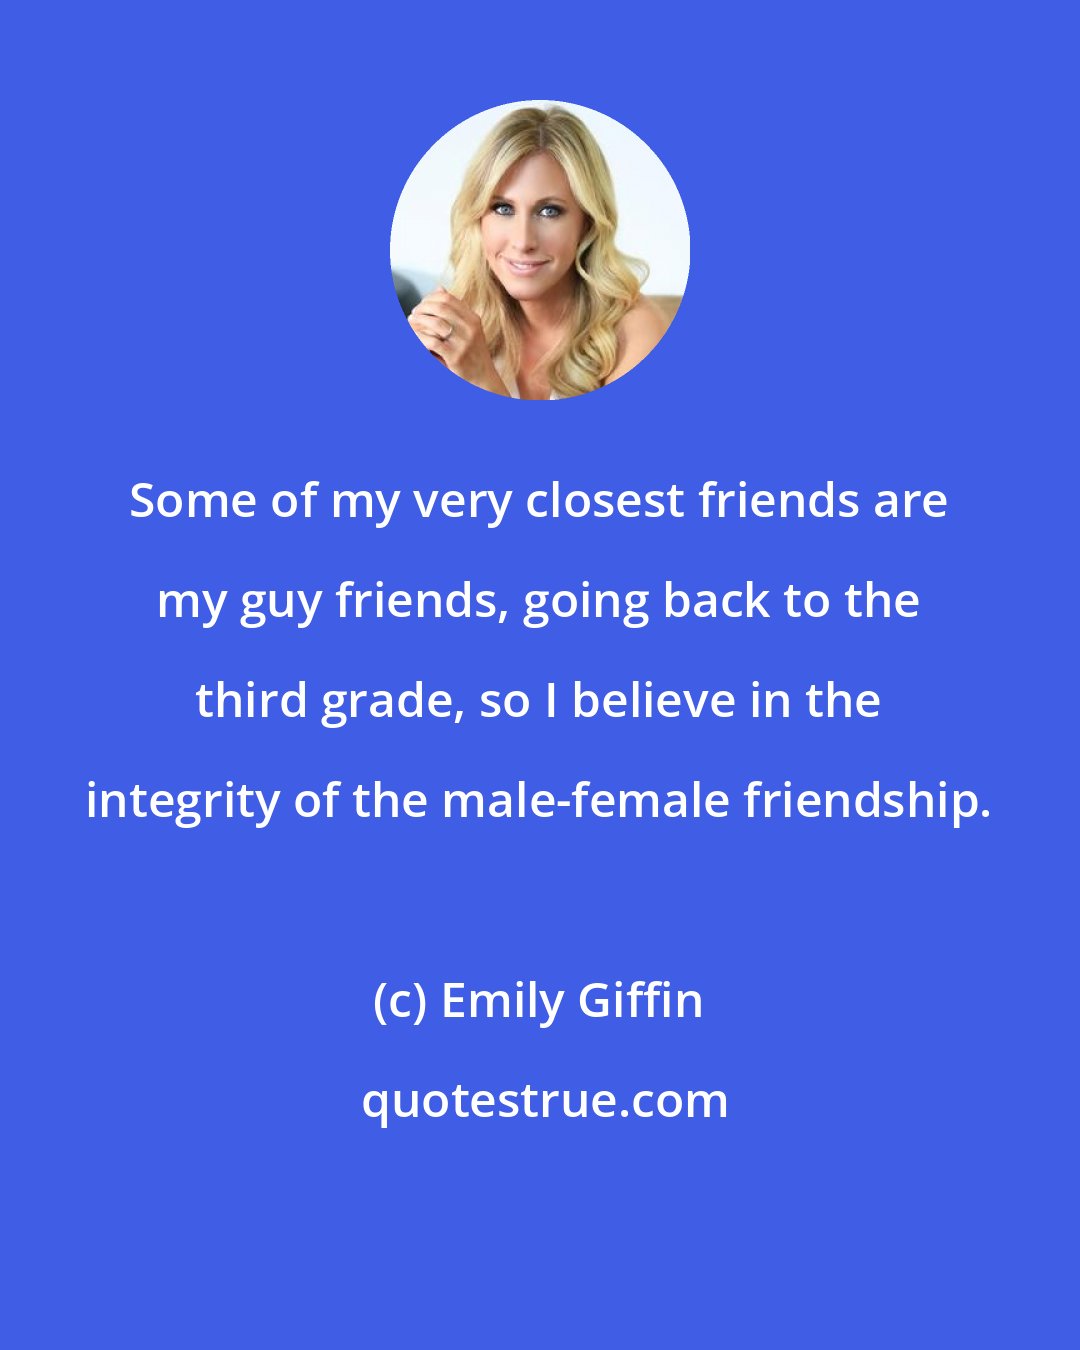 Emily Giffin: Some of my very closest friends are my guy friends, going back to the third grade, so I believe in the integrity of the male-female friendship.